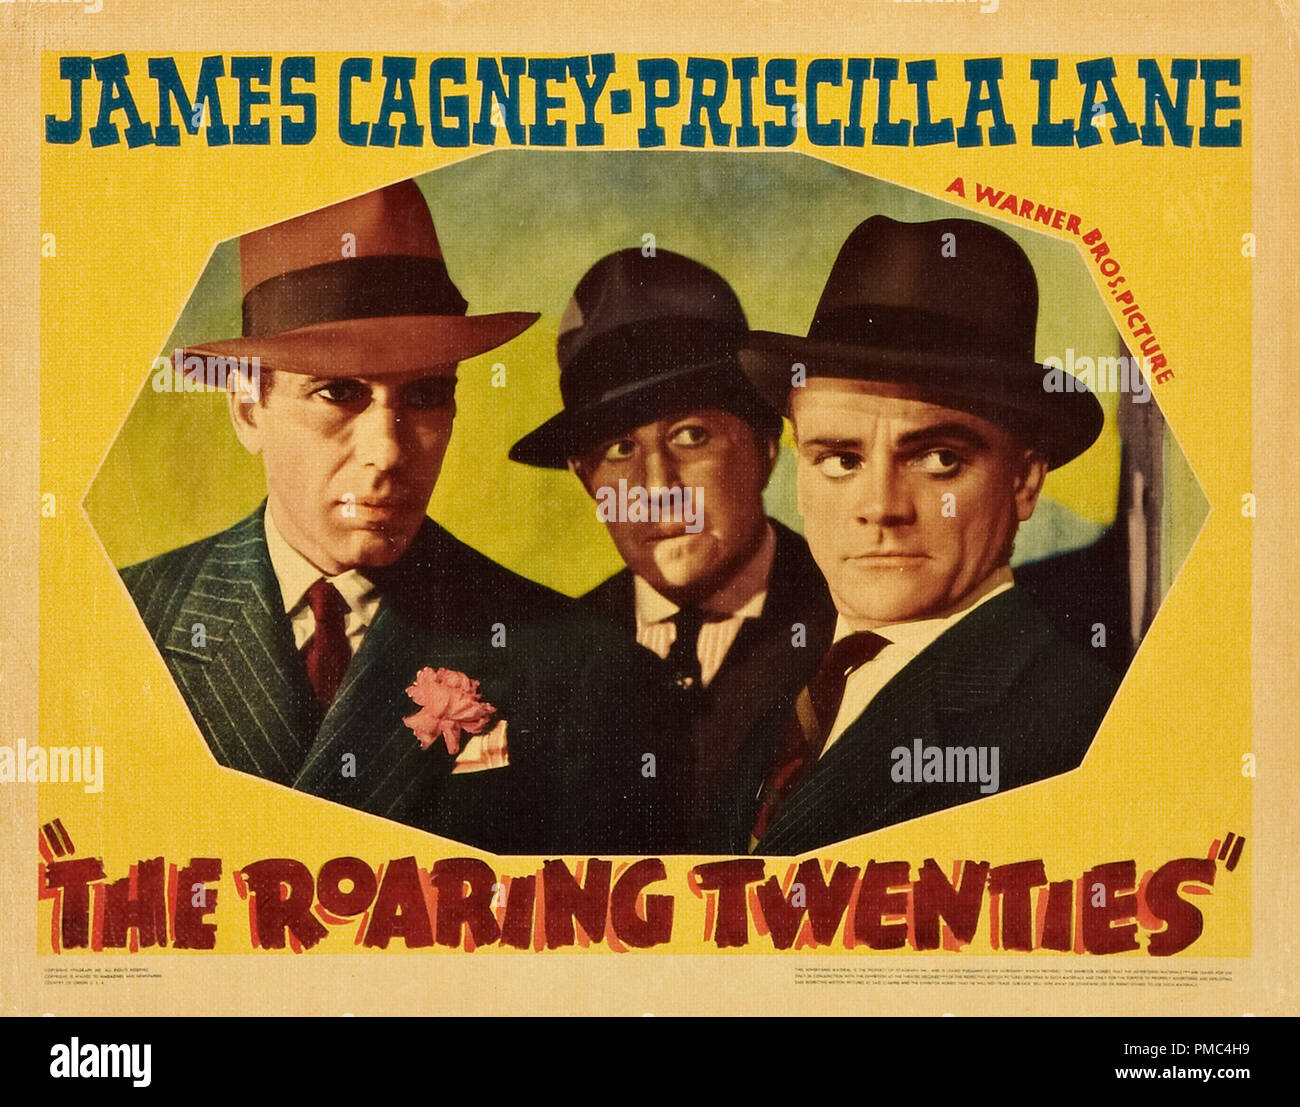 Humphrey Bogart, James Cagney,  The Roaring Twenties (Warner Brothers, 1939). Poster  File Reference # 33595 782THA Stock Photo